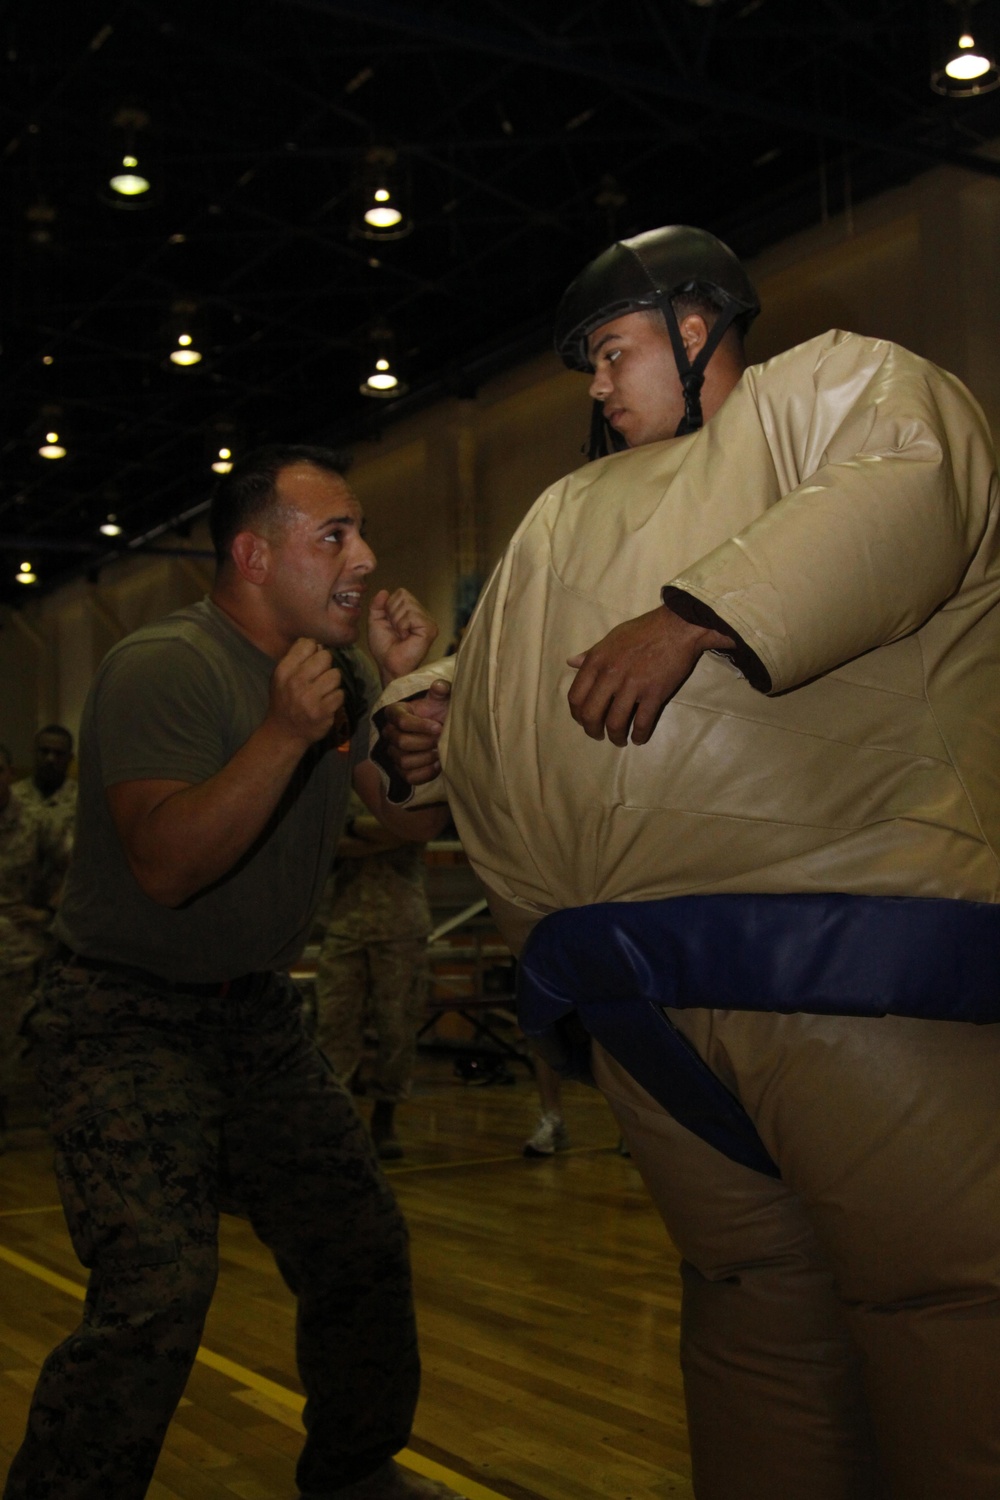 MWSS-171 bashes heads in Sumo Basho